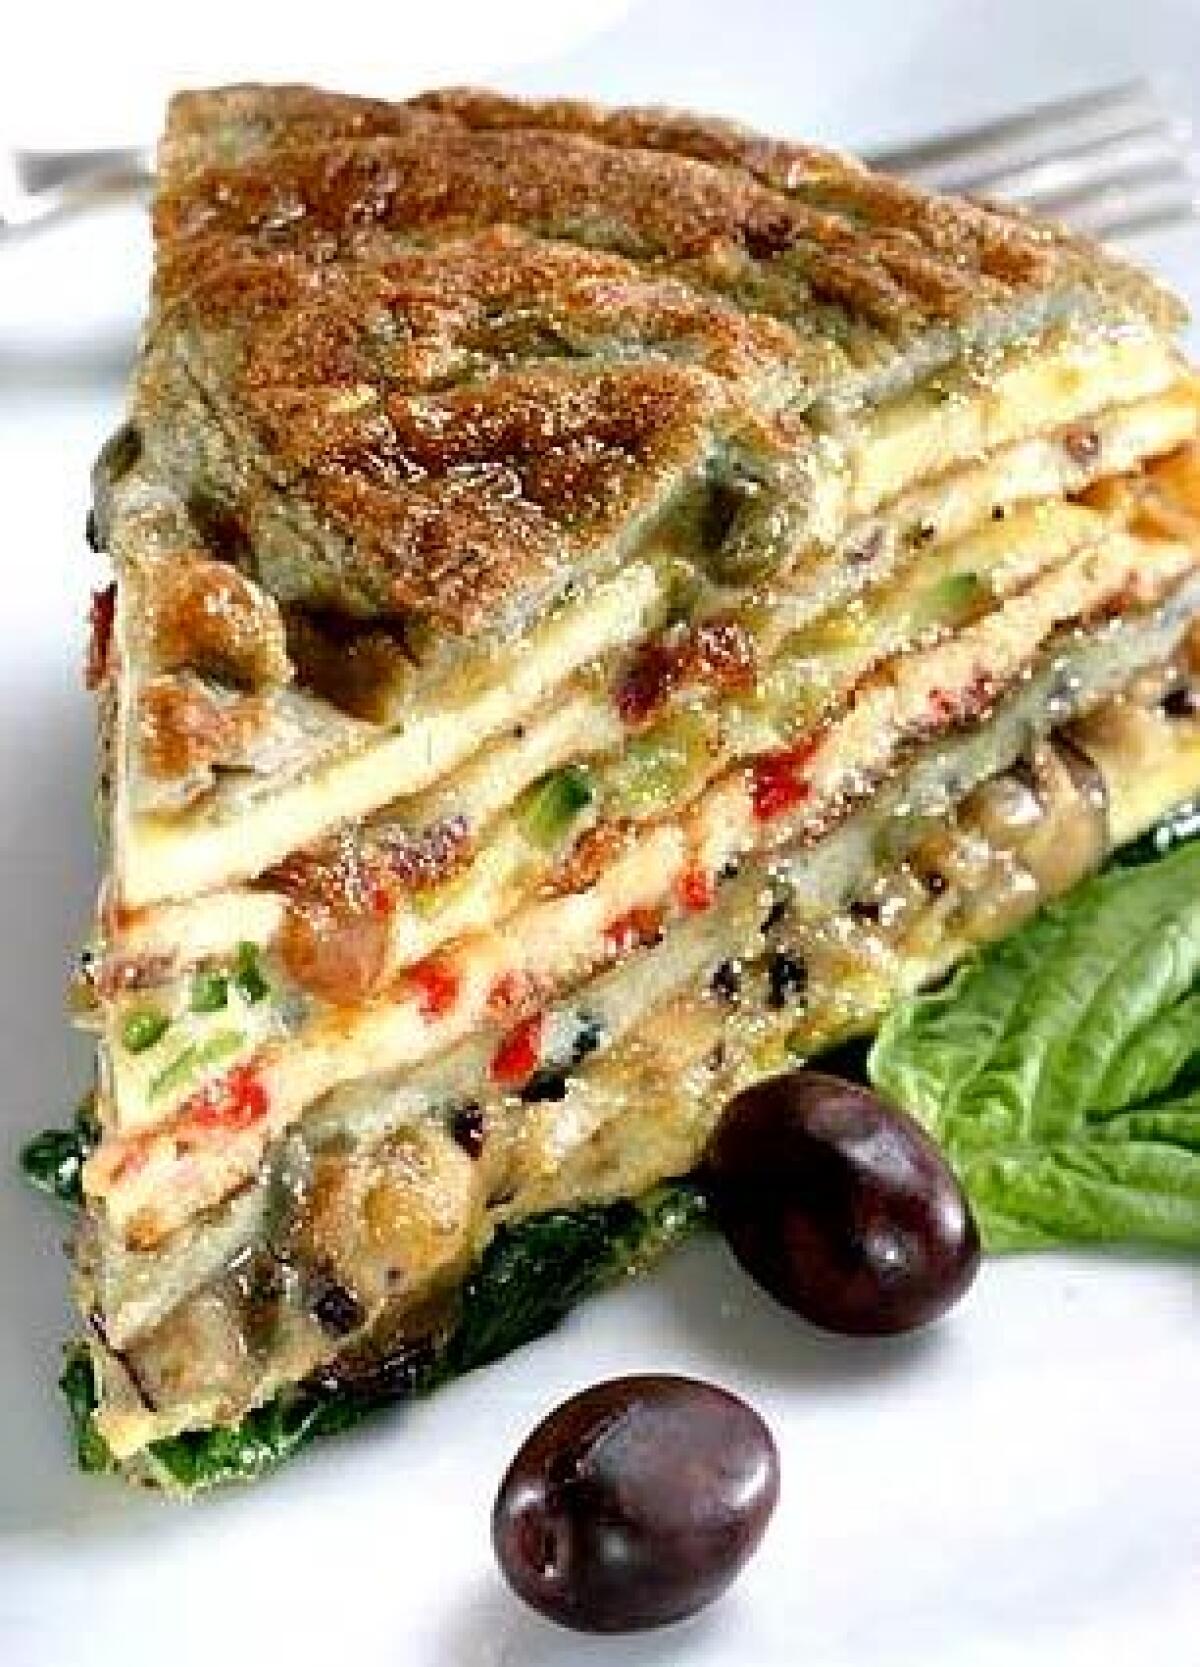 Layers of flavored omelets are stacked high and cut into bite-size pieces.